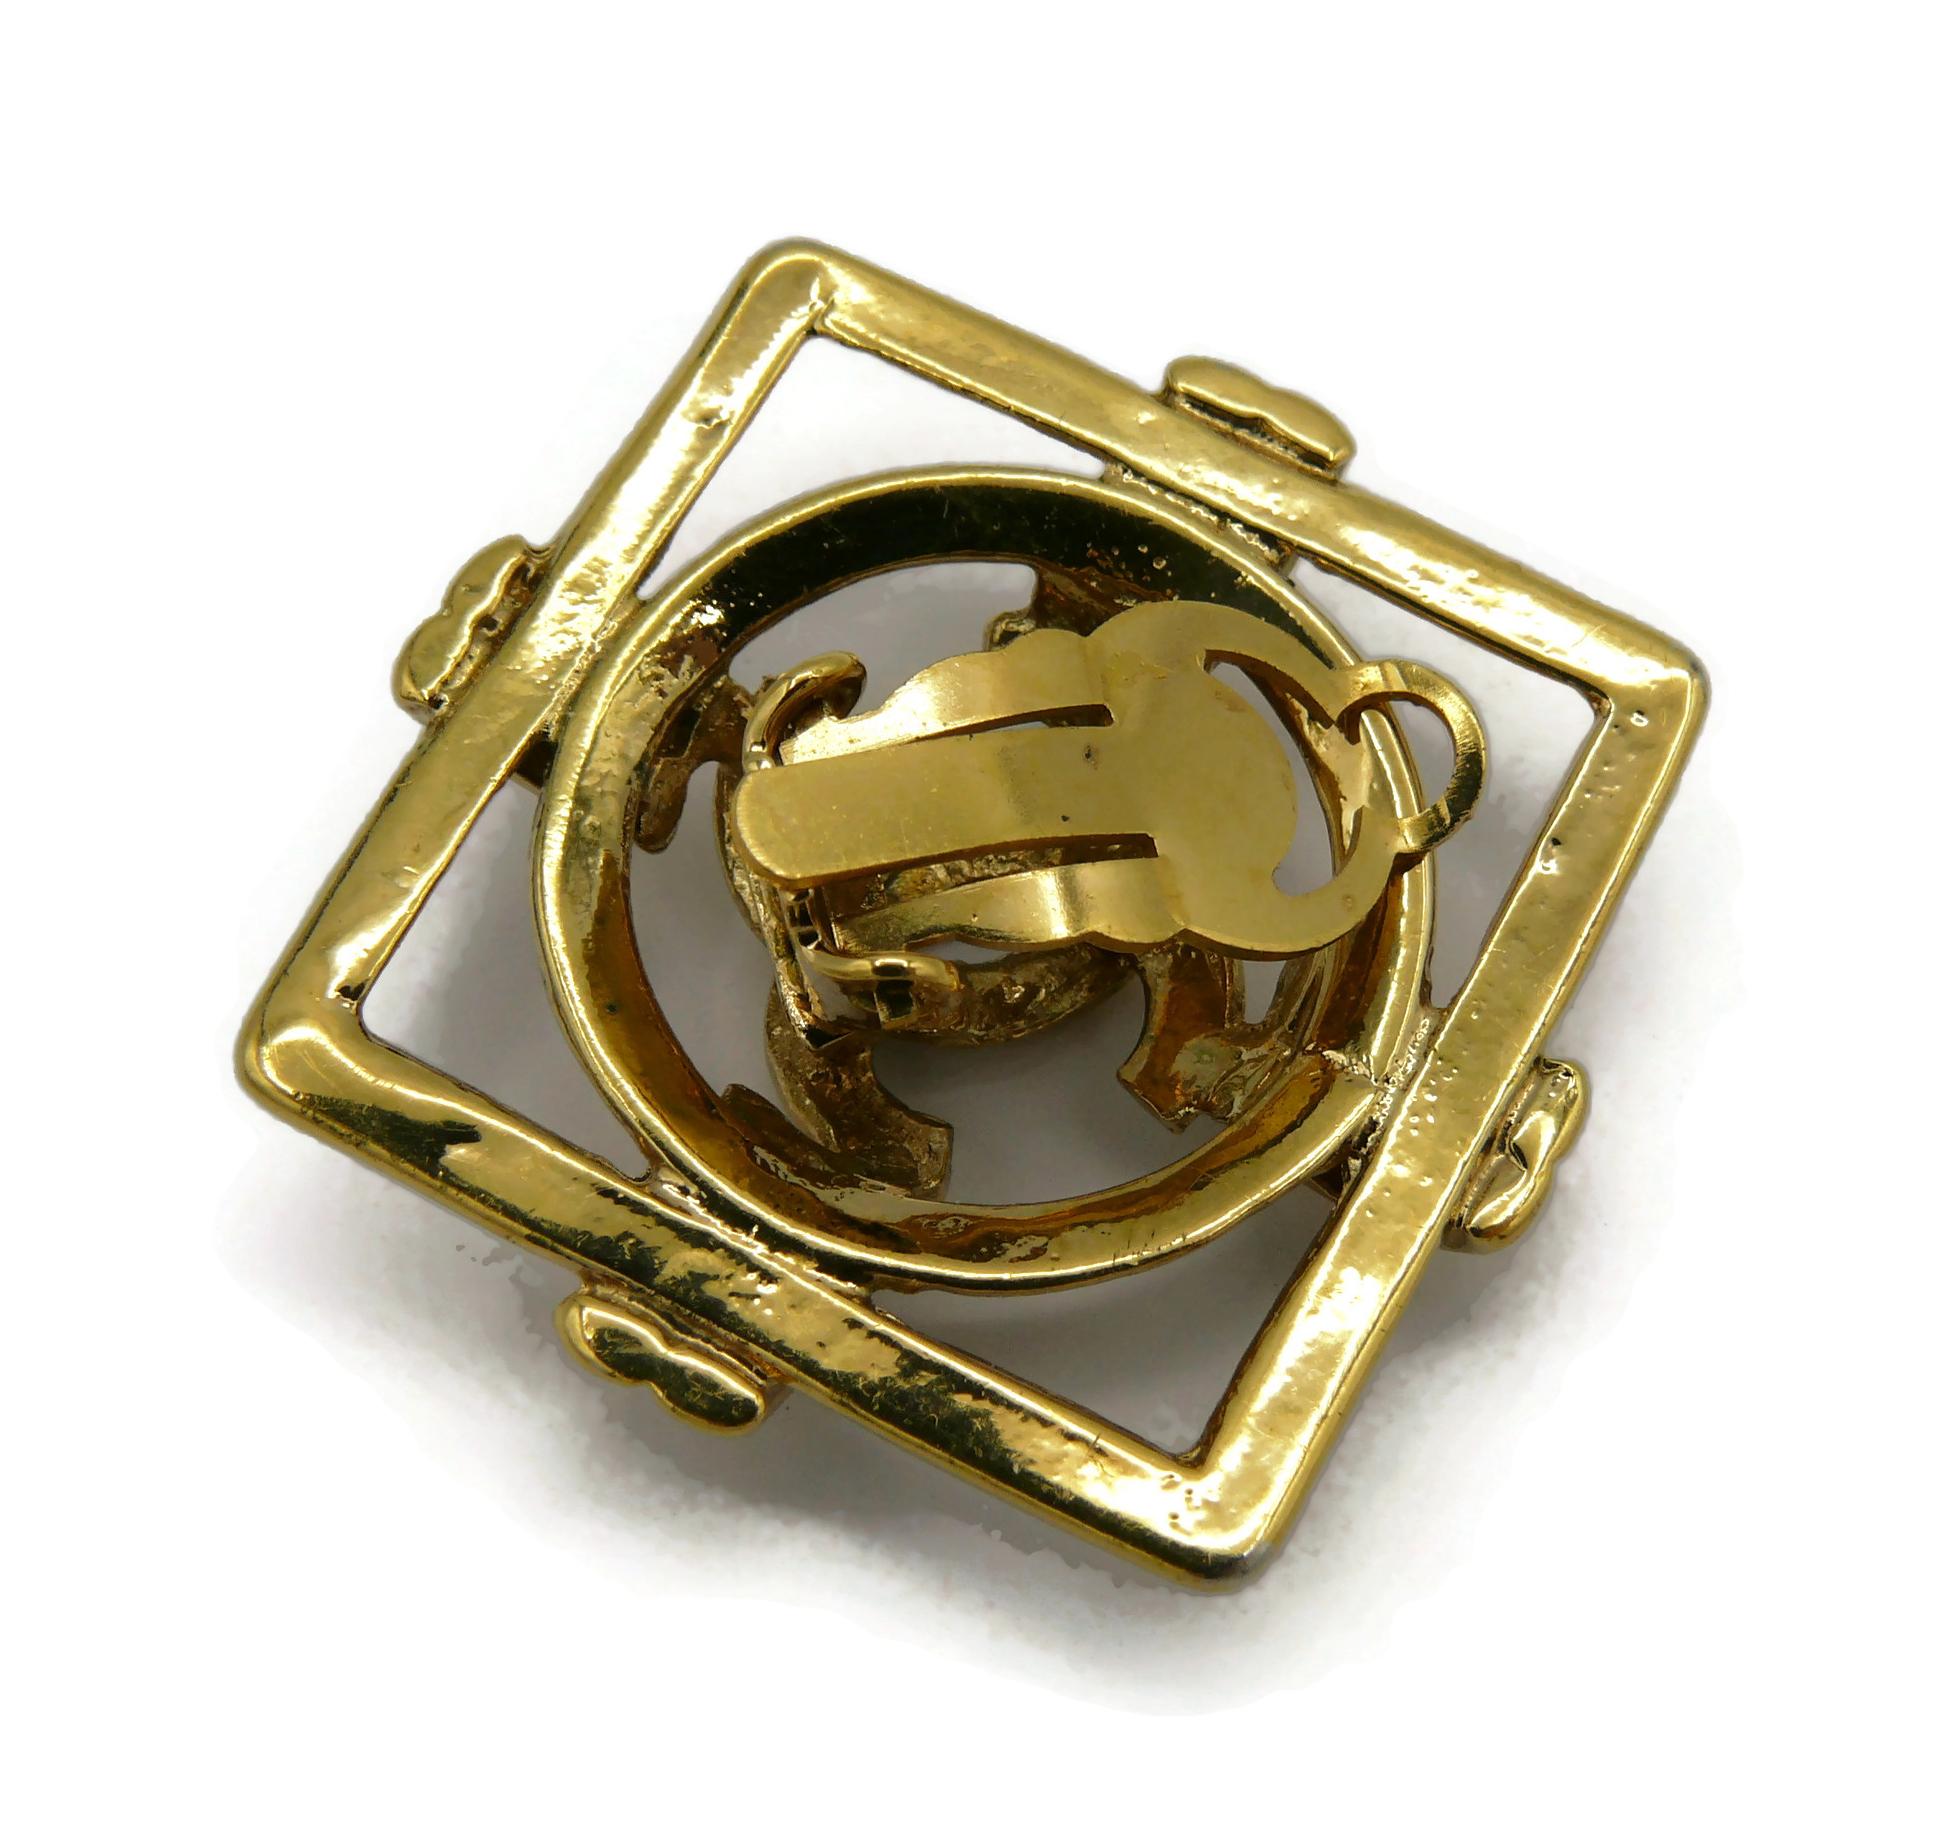 CHANEL by KARL LAGERFELD Vintage Gold Tone CC Clip-On Earrings, 1994 For Sale 4